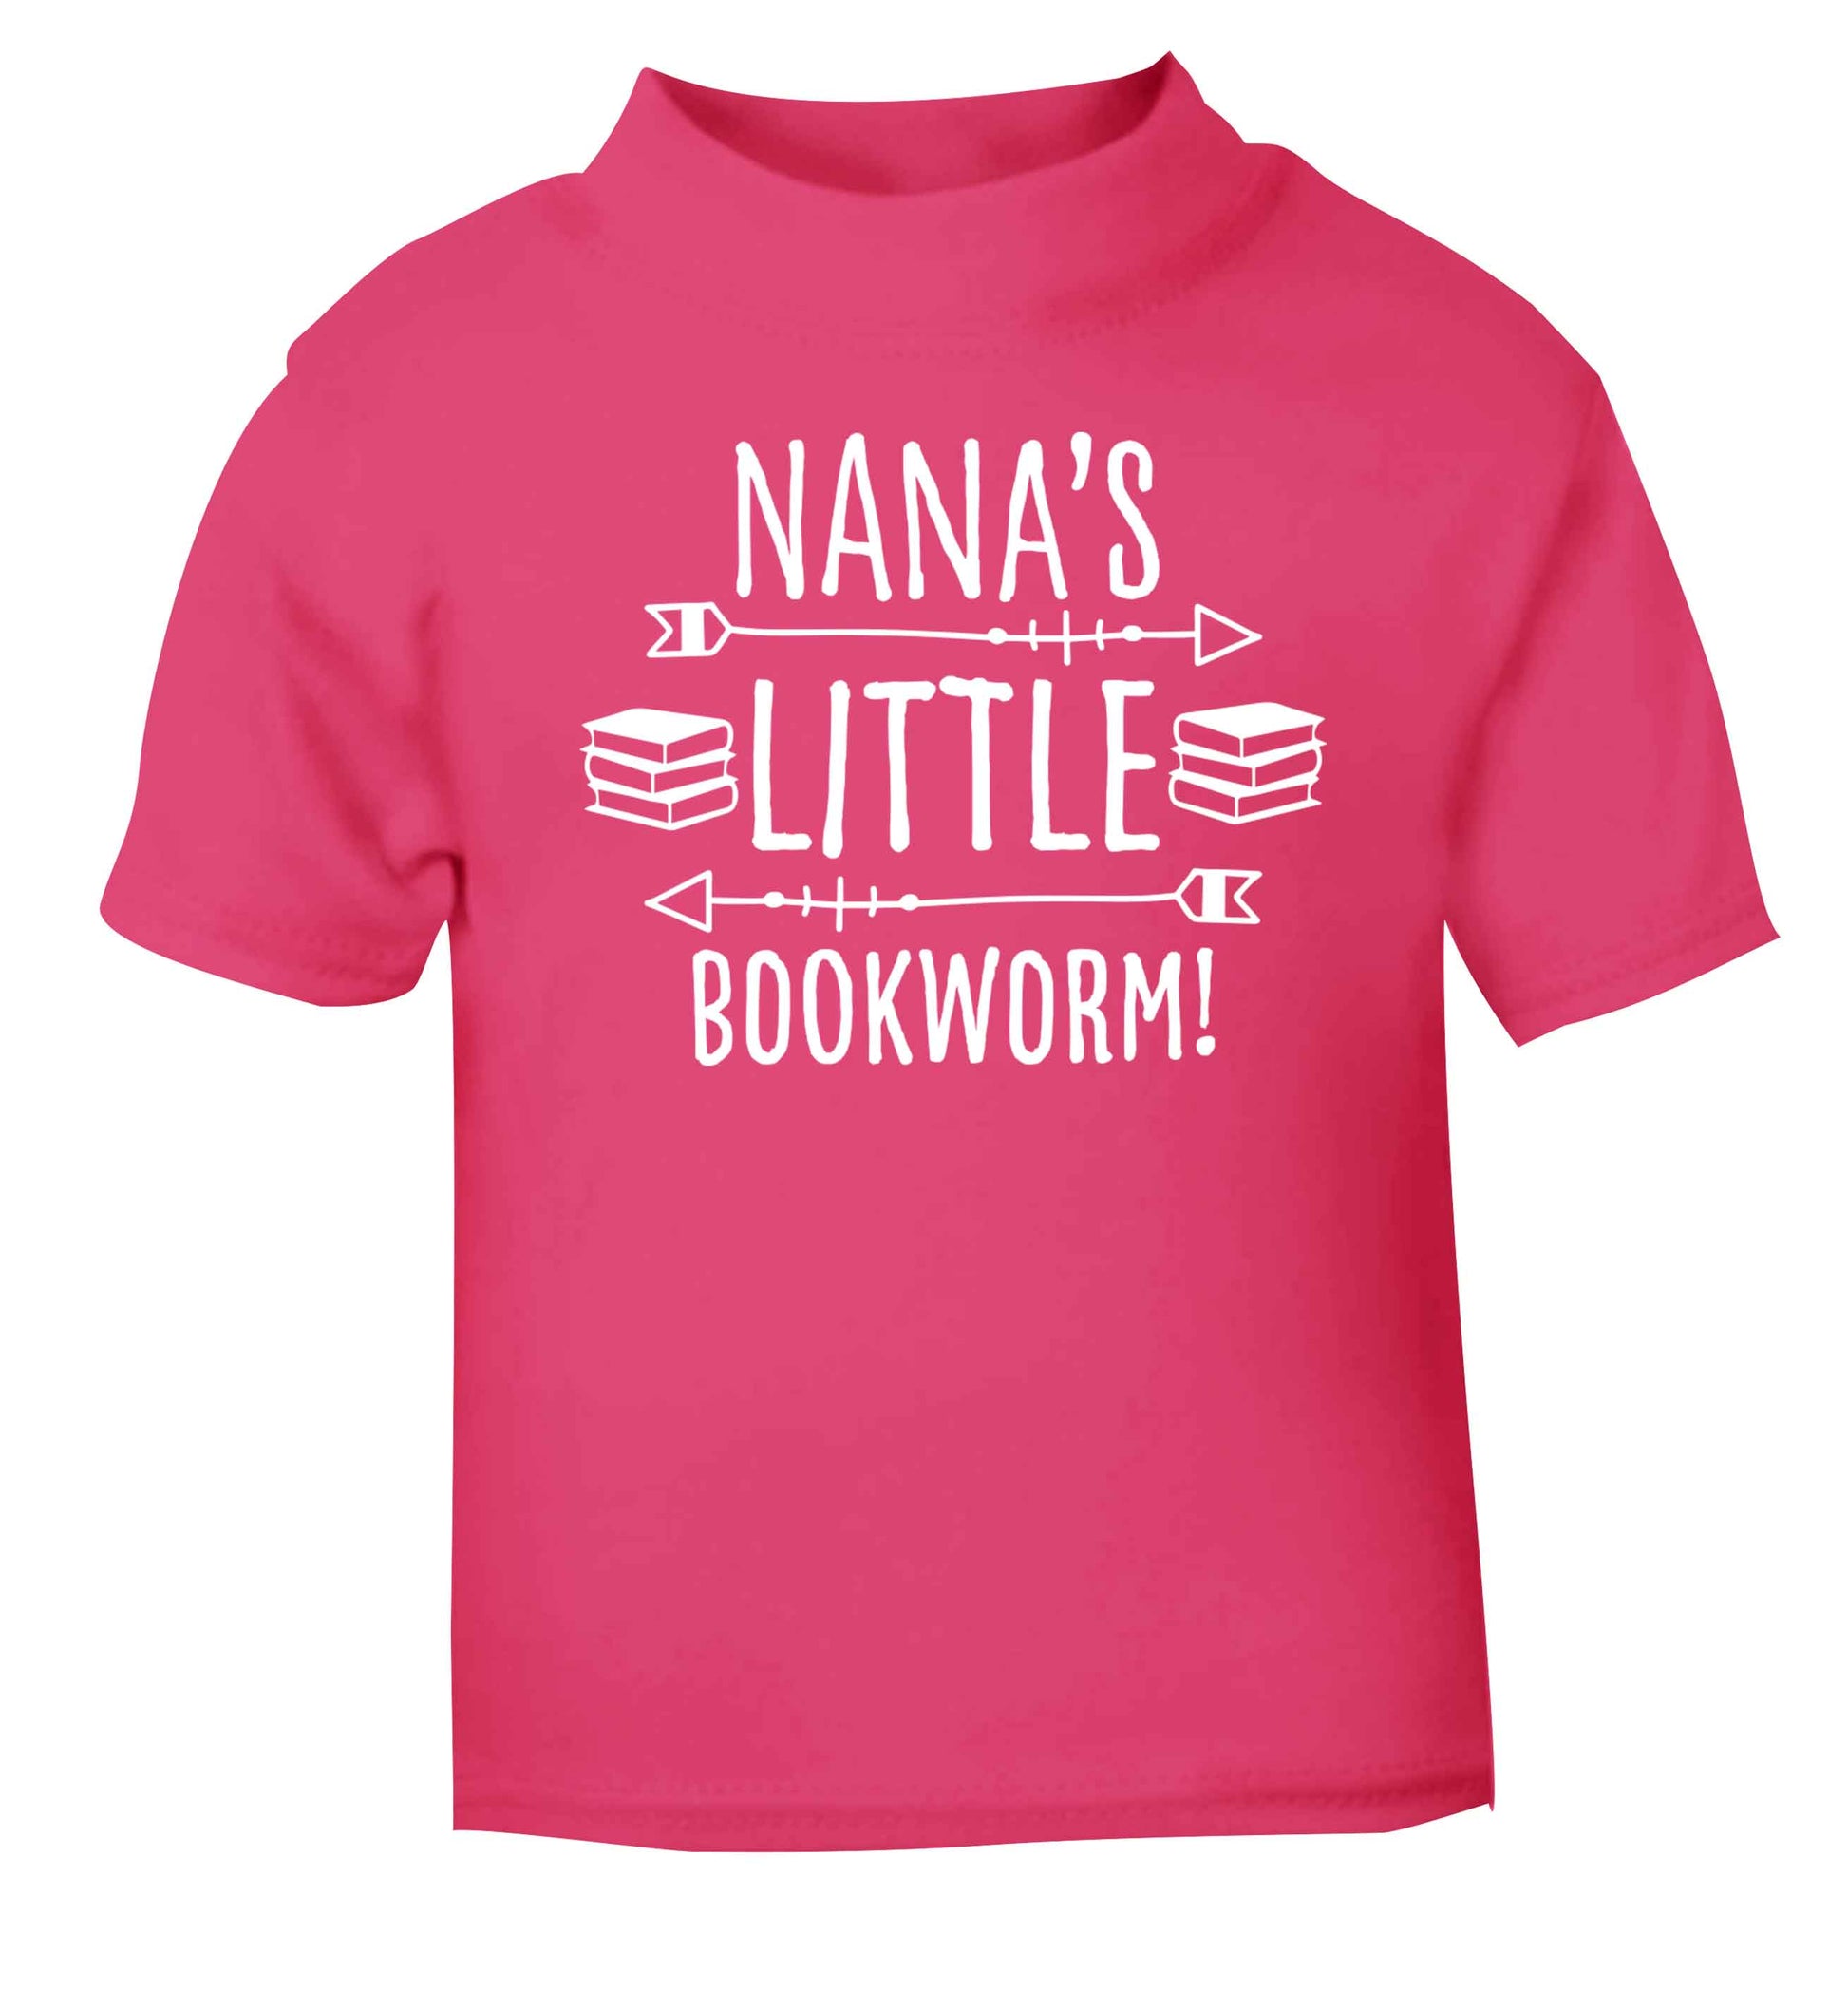 Nana's little bookworm pink baby toddler Tshirt 2 Years